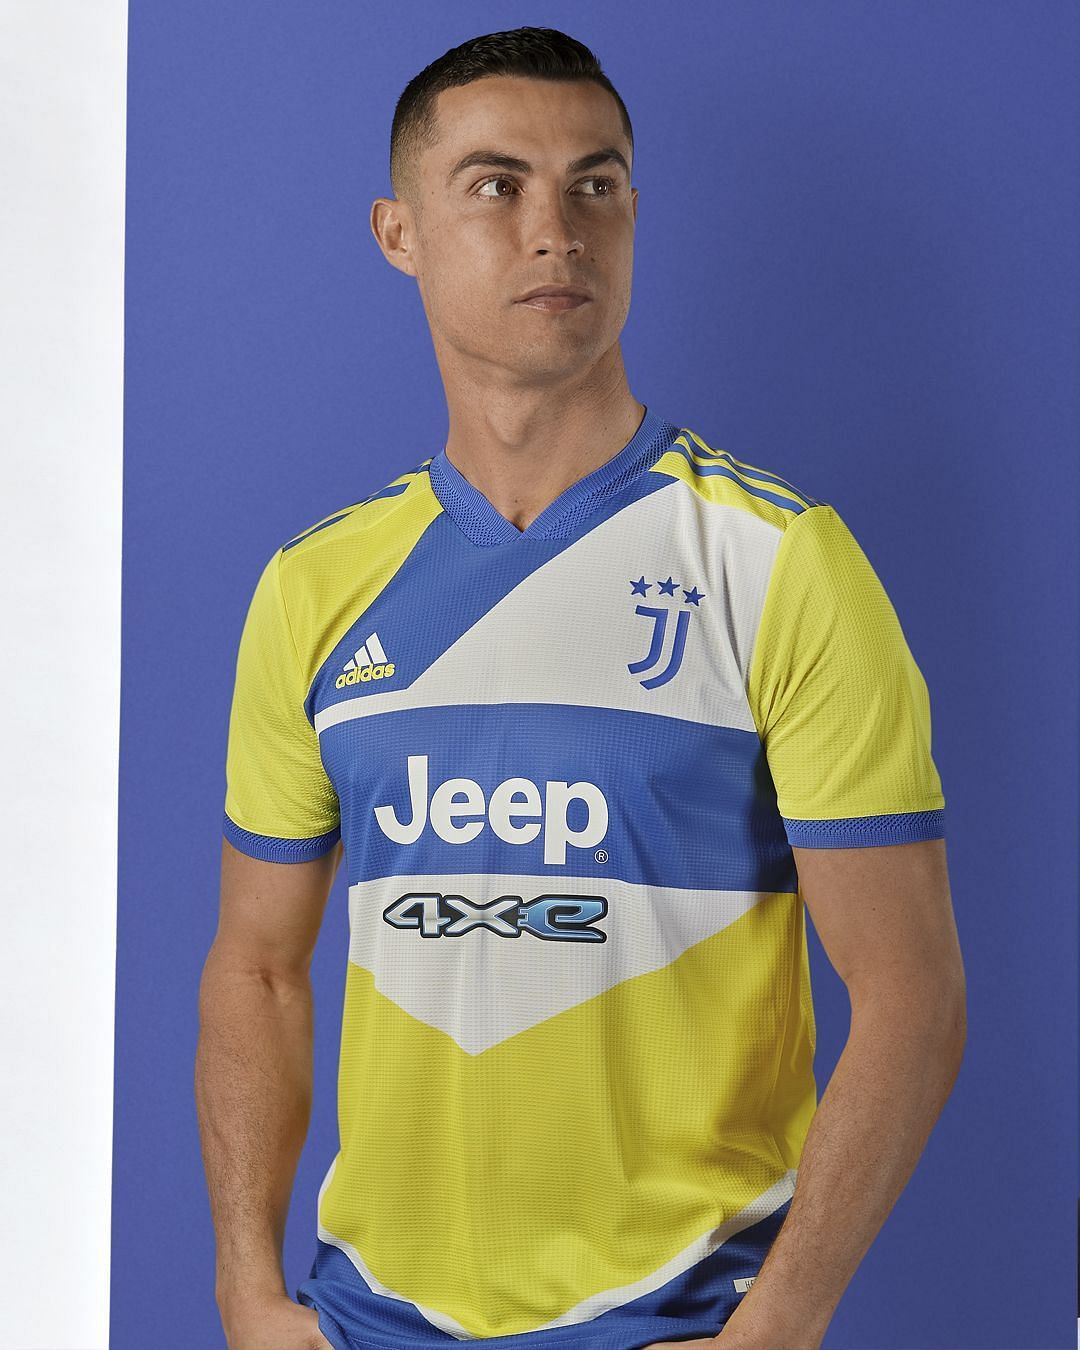 The 10 worst jerseys of Serie A 2021-22